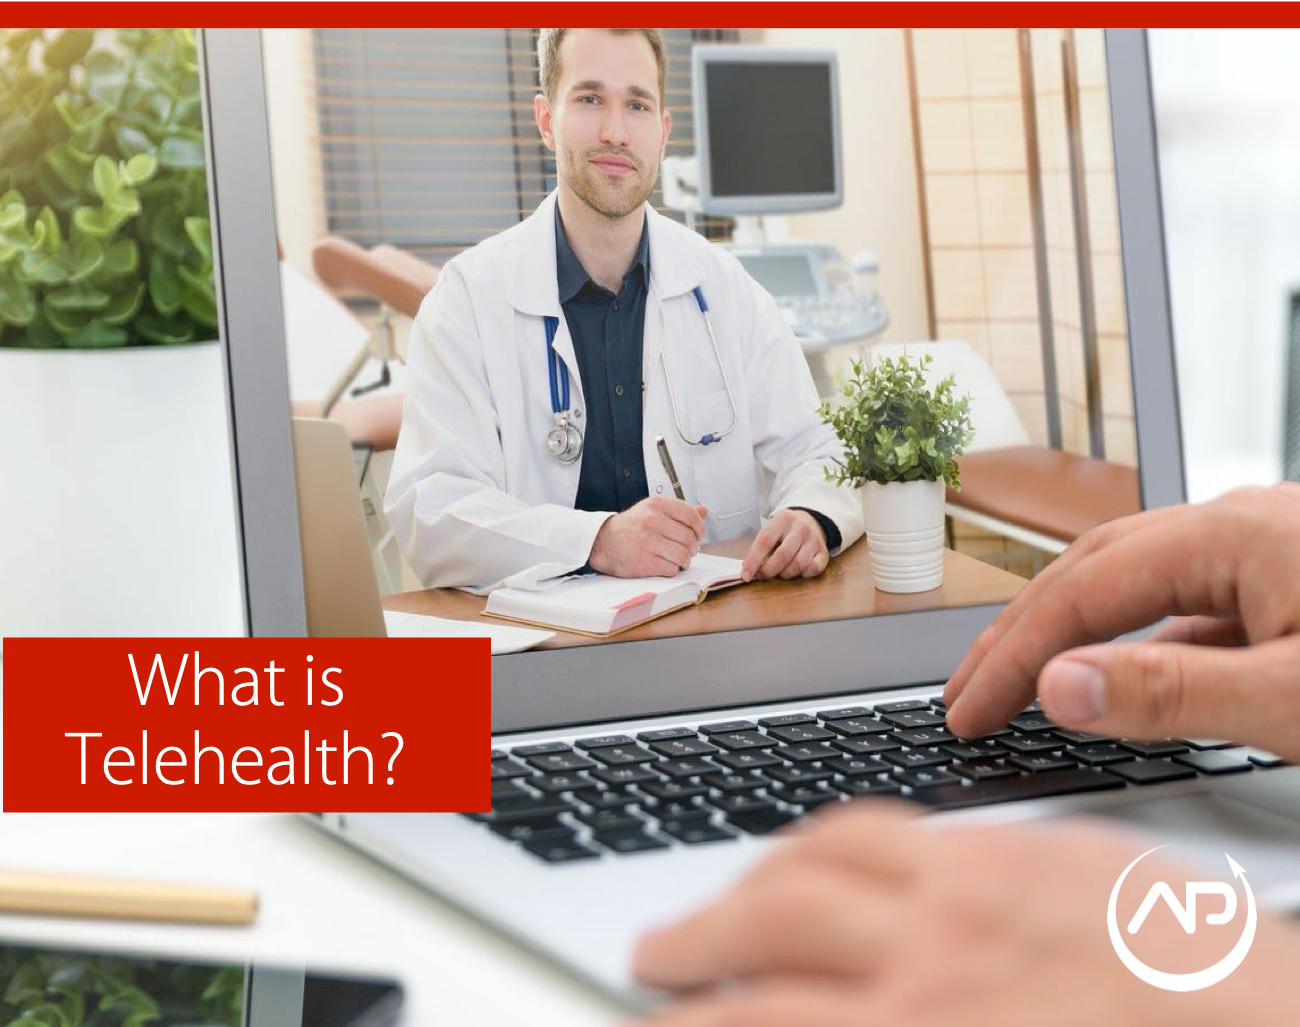 Telehealth: More Than A Video Conference